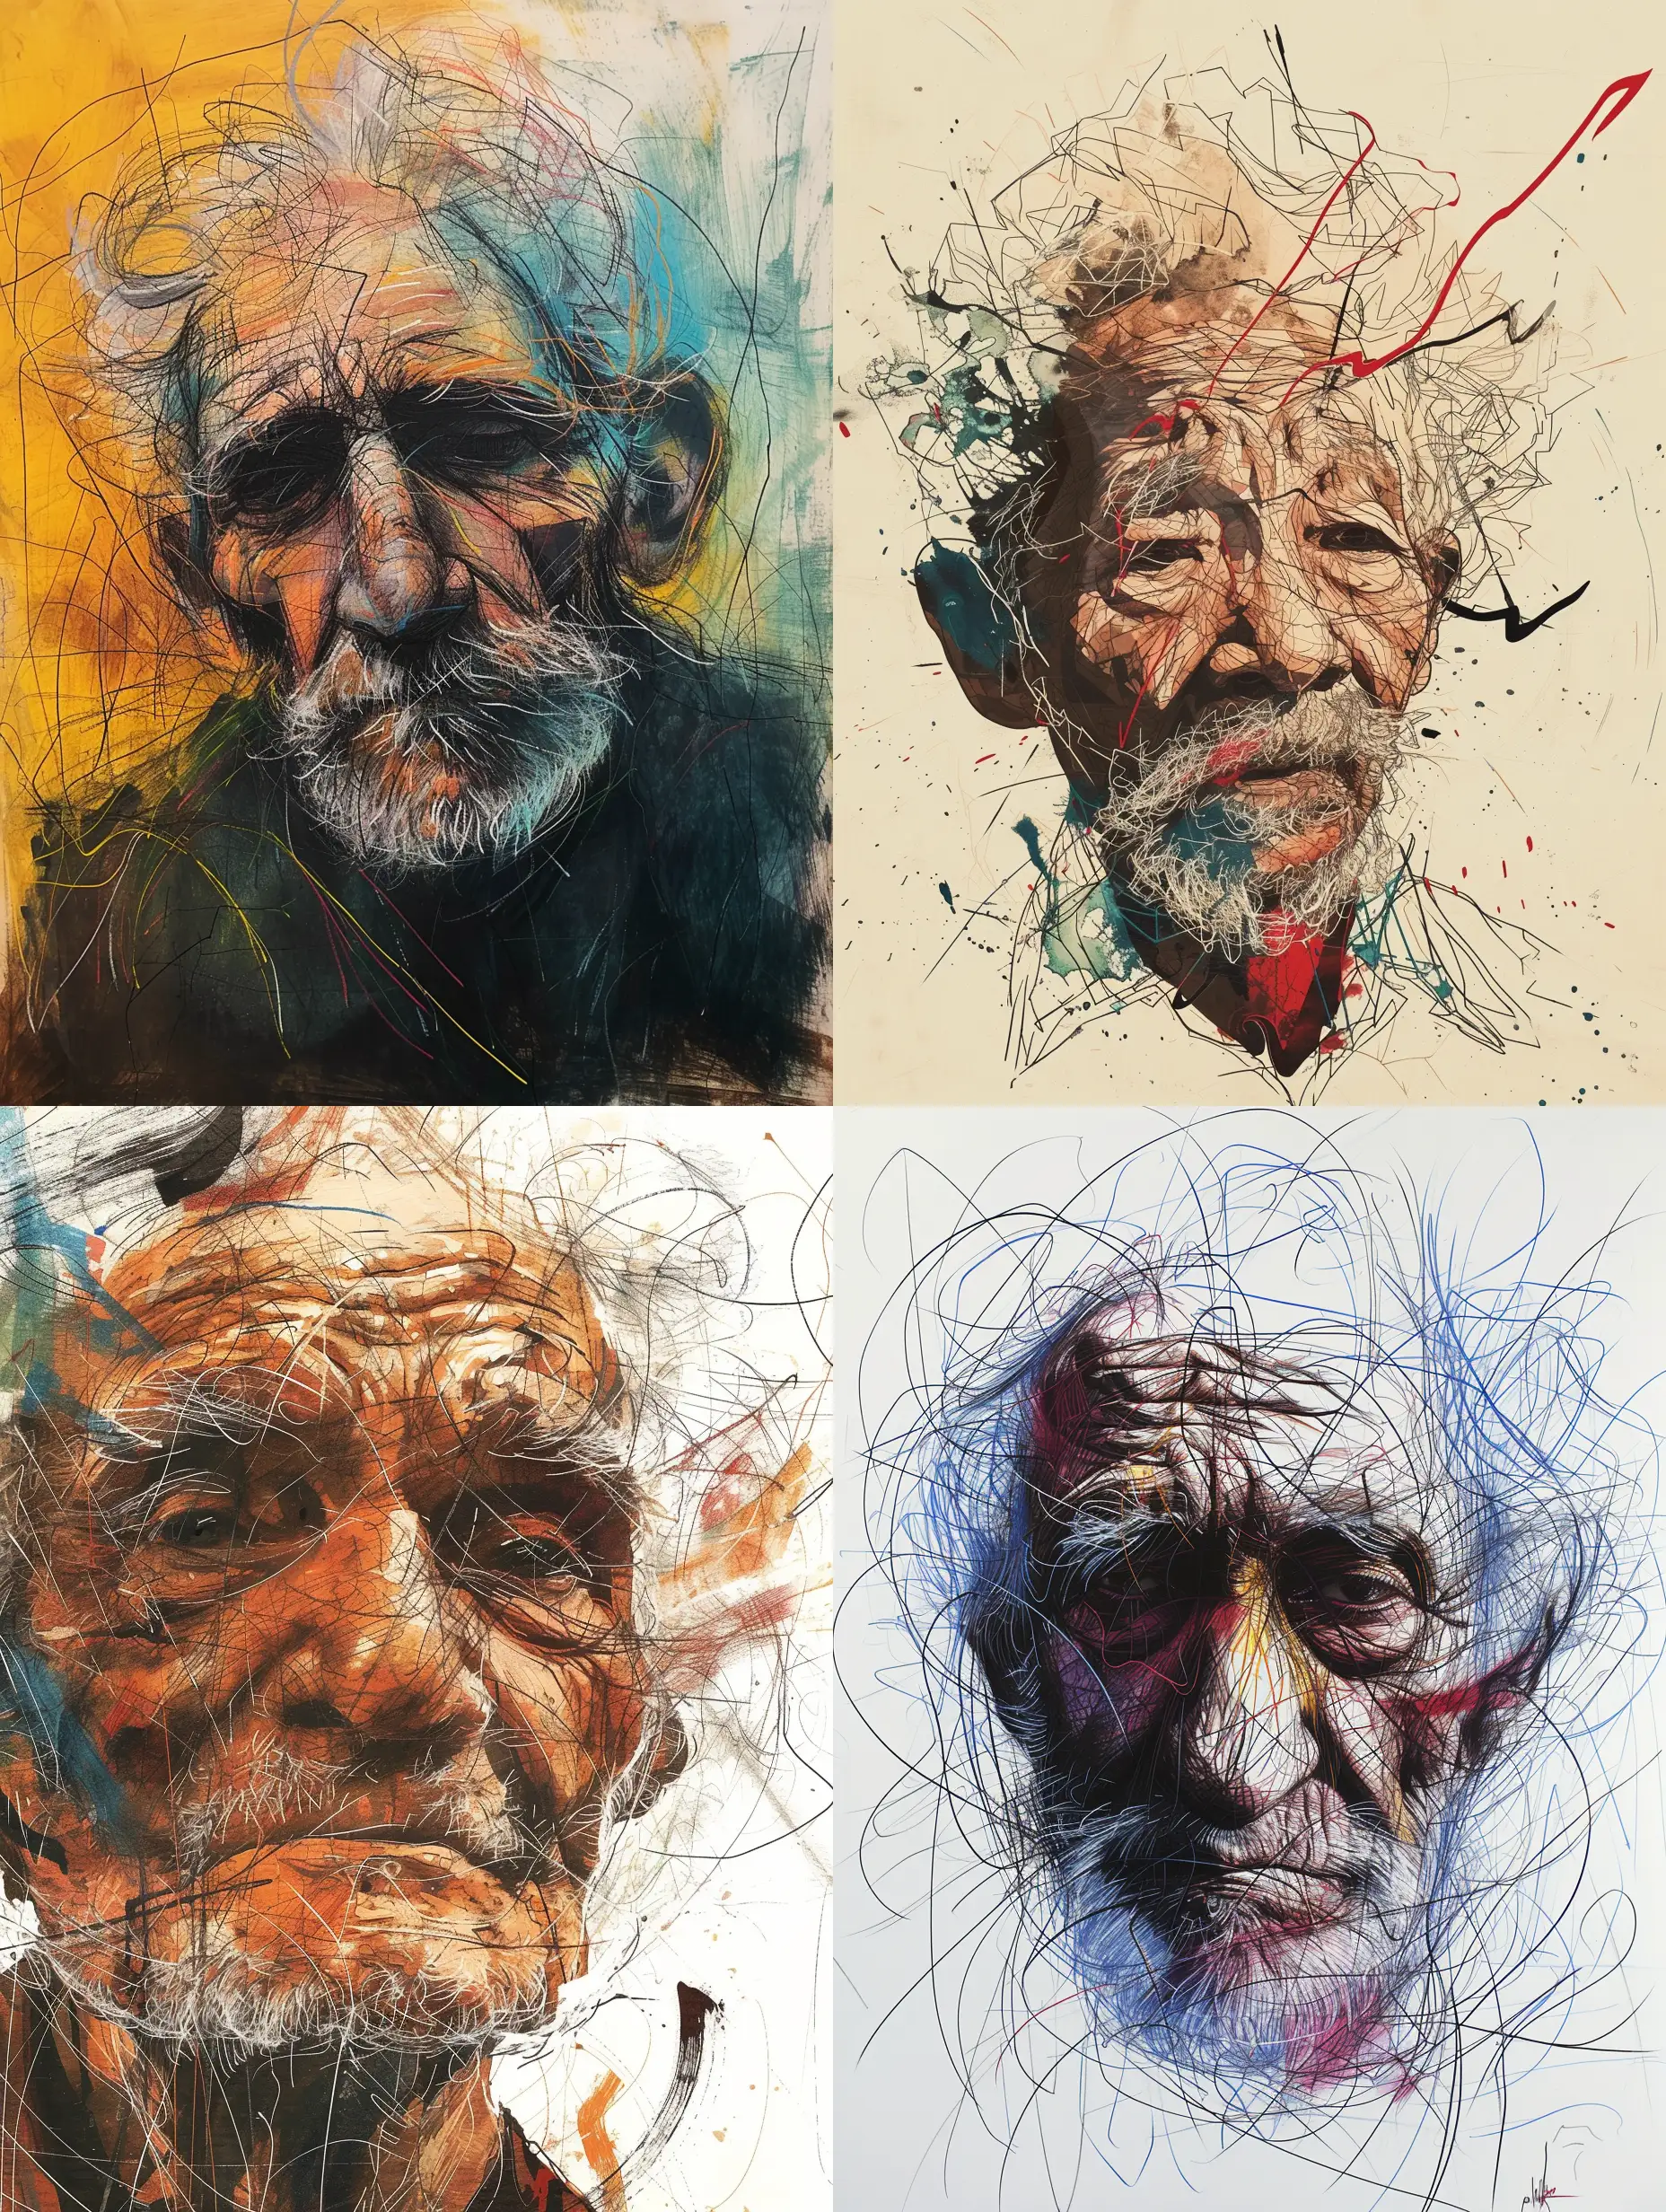 Energetic-Expression-Affandis-Contemporary-Old-Man-Portrait